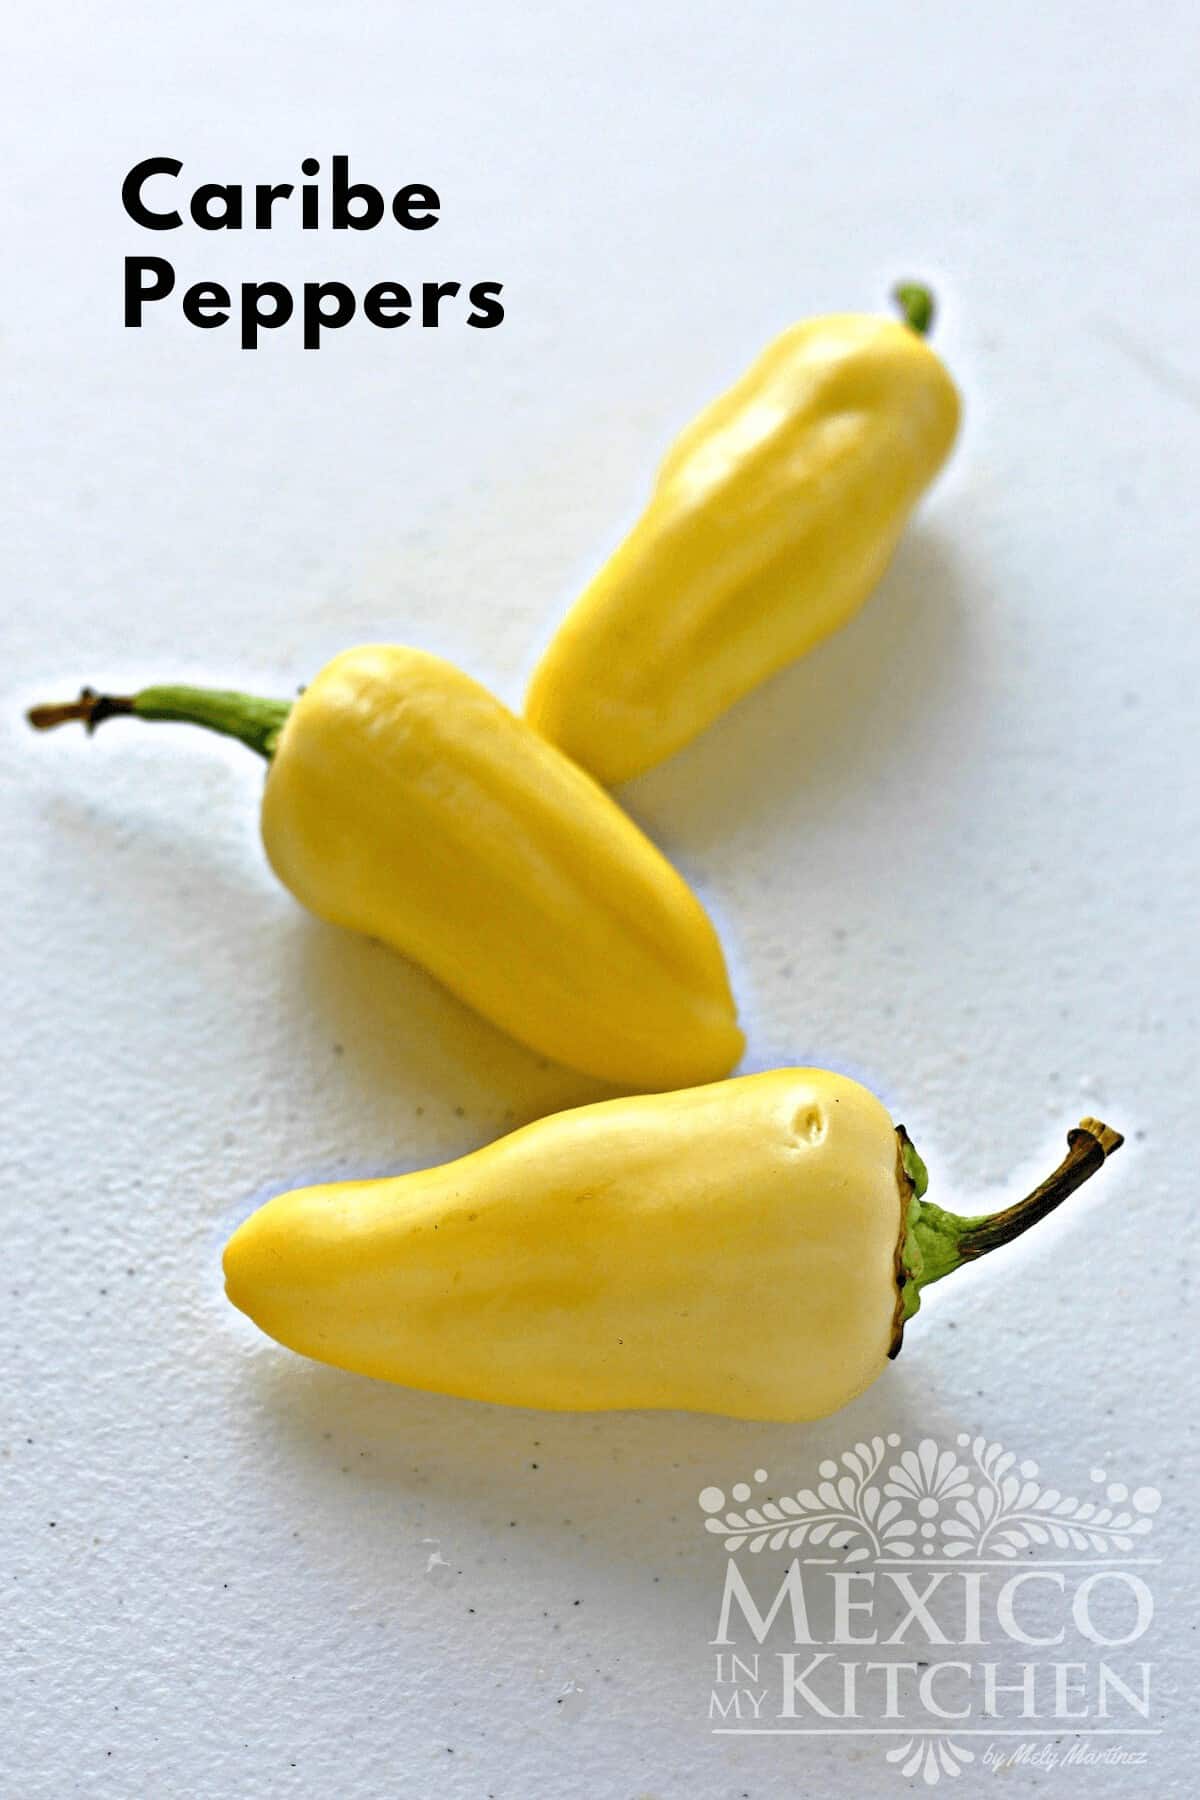 Caribe peppers